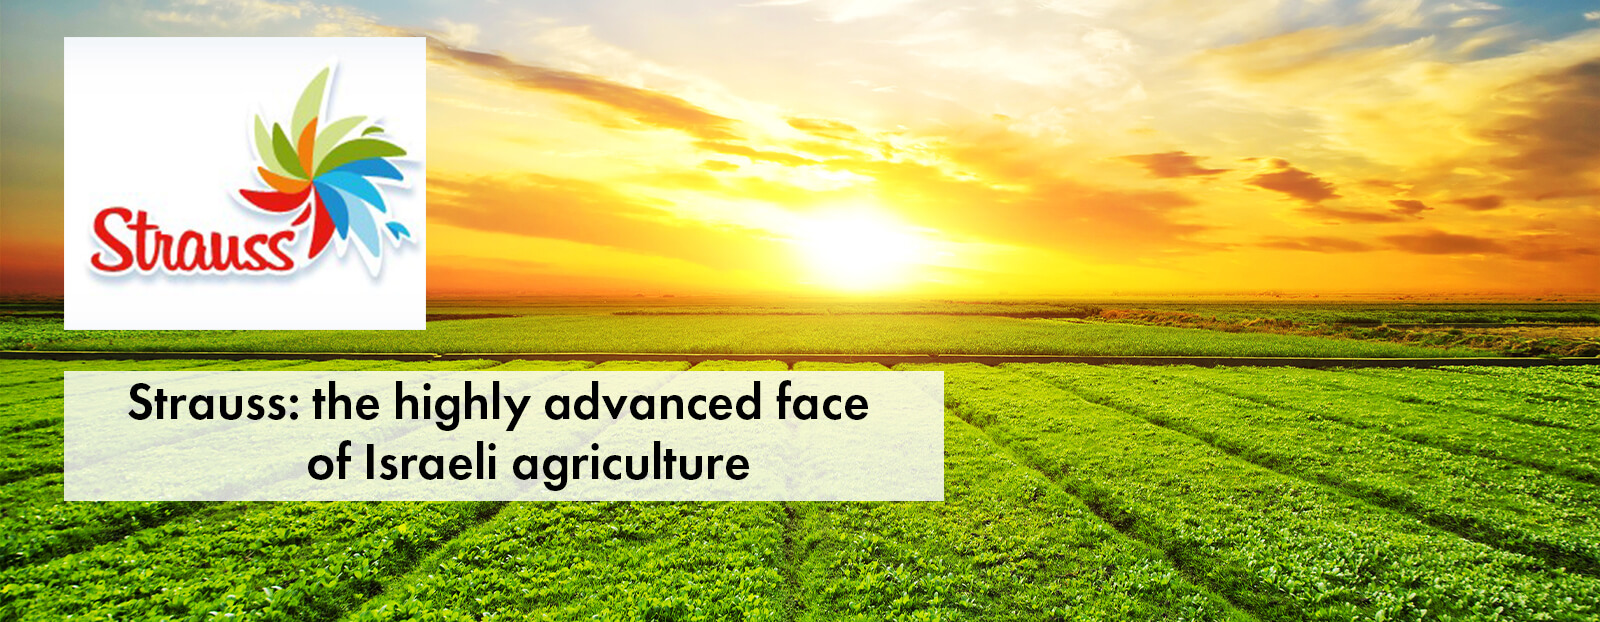 Strauss: the highly advanced face of Israeli agriculture.